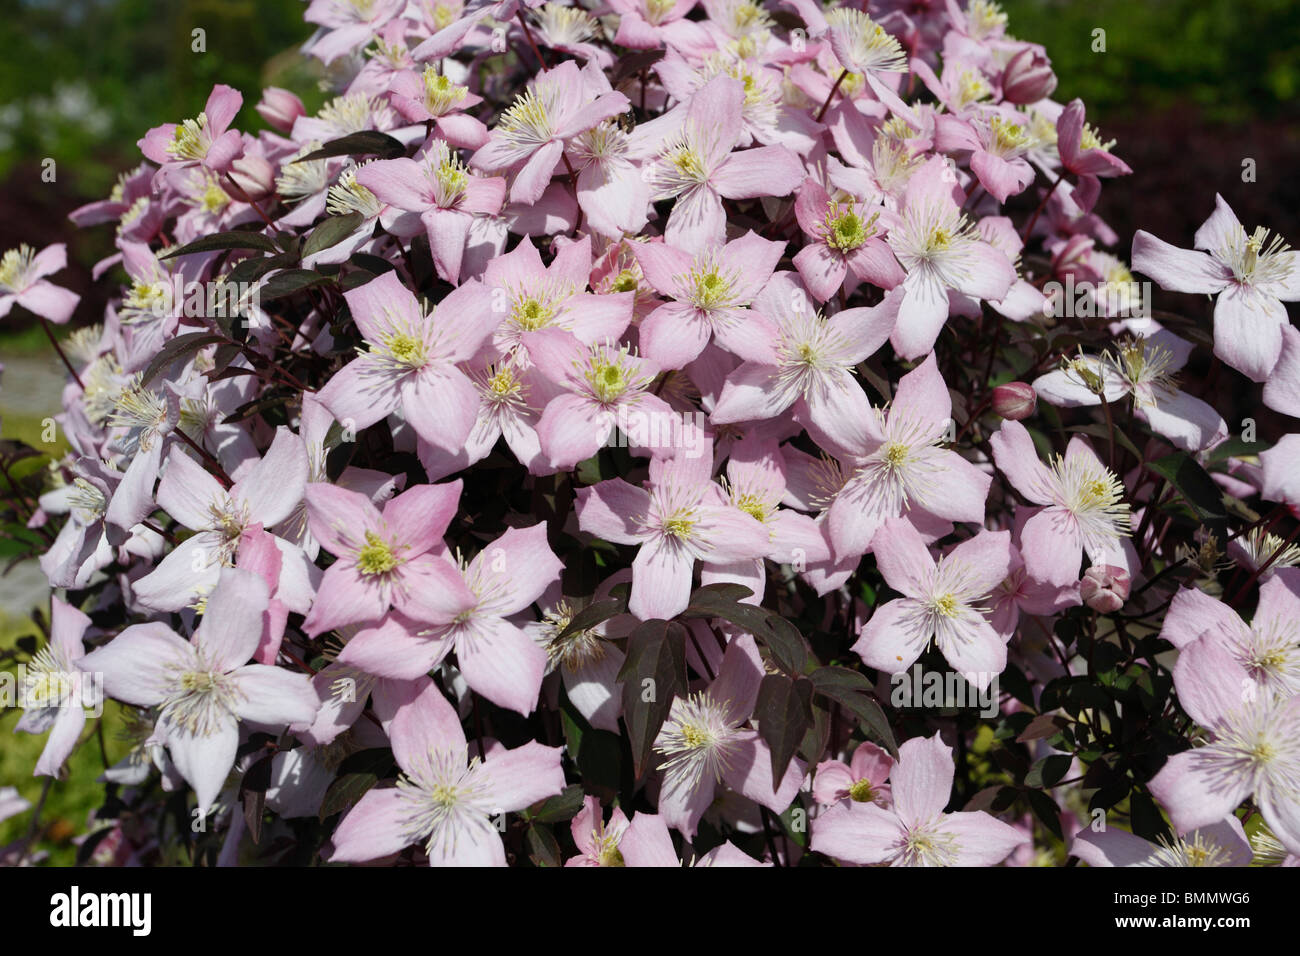 Clematis montana pink perfection close up of flowers Stock Photo